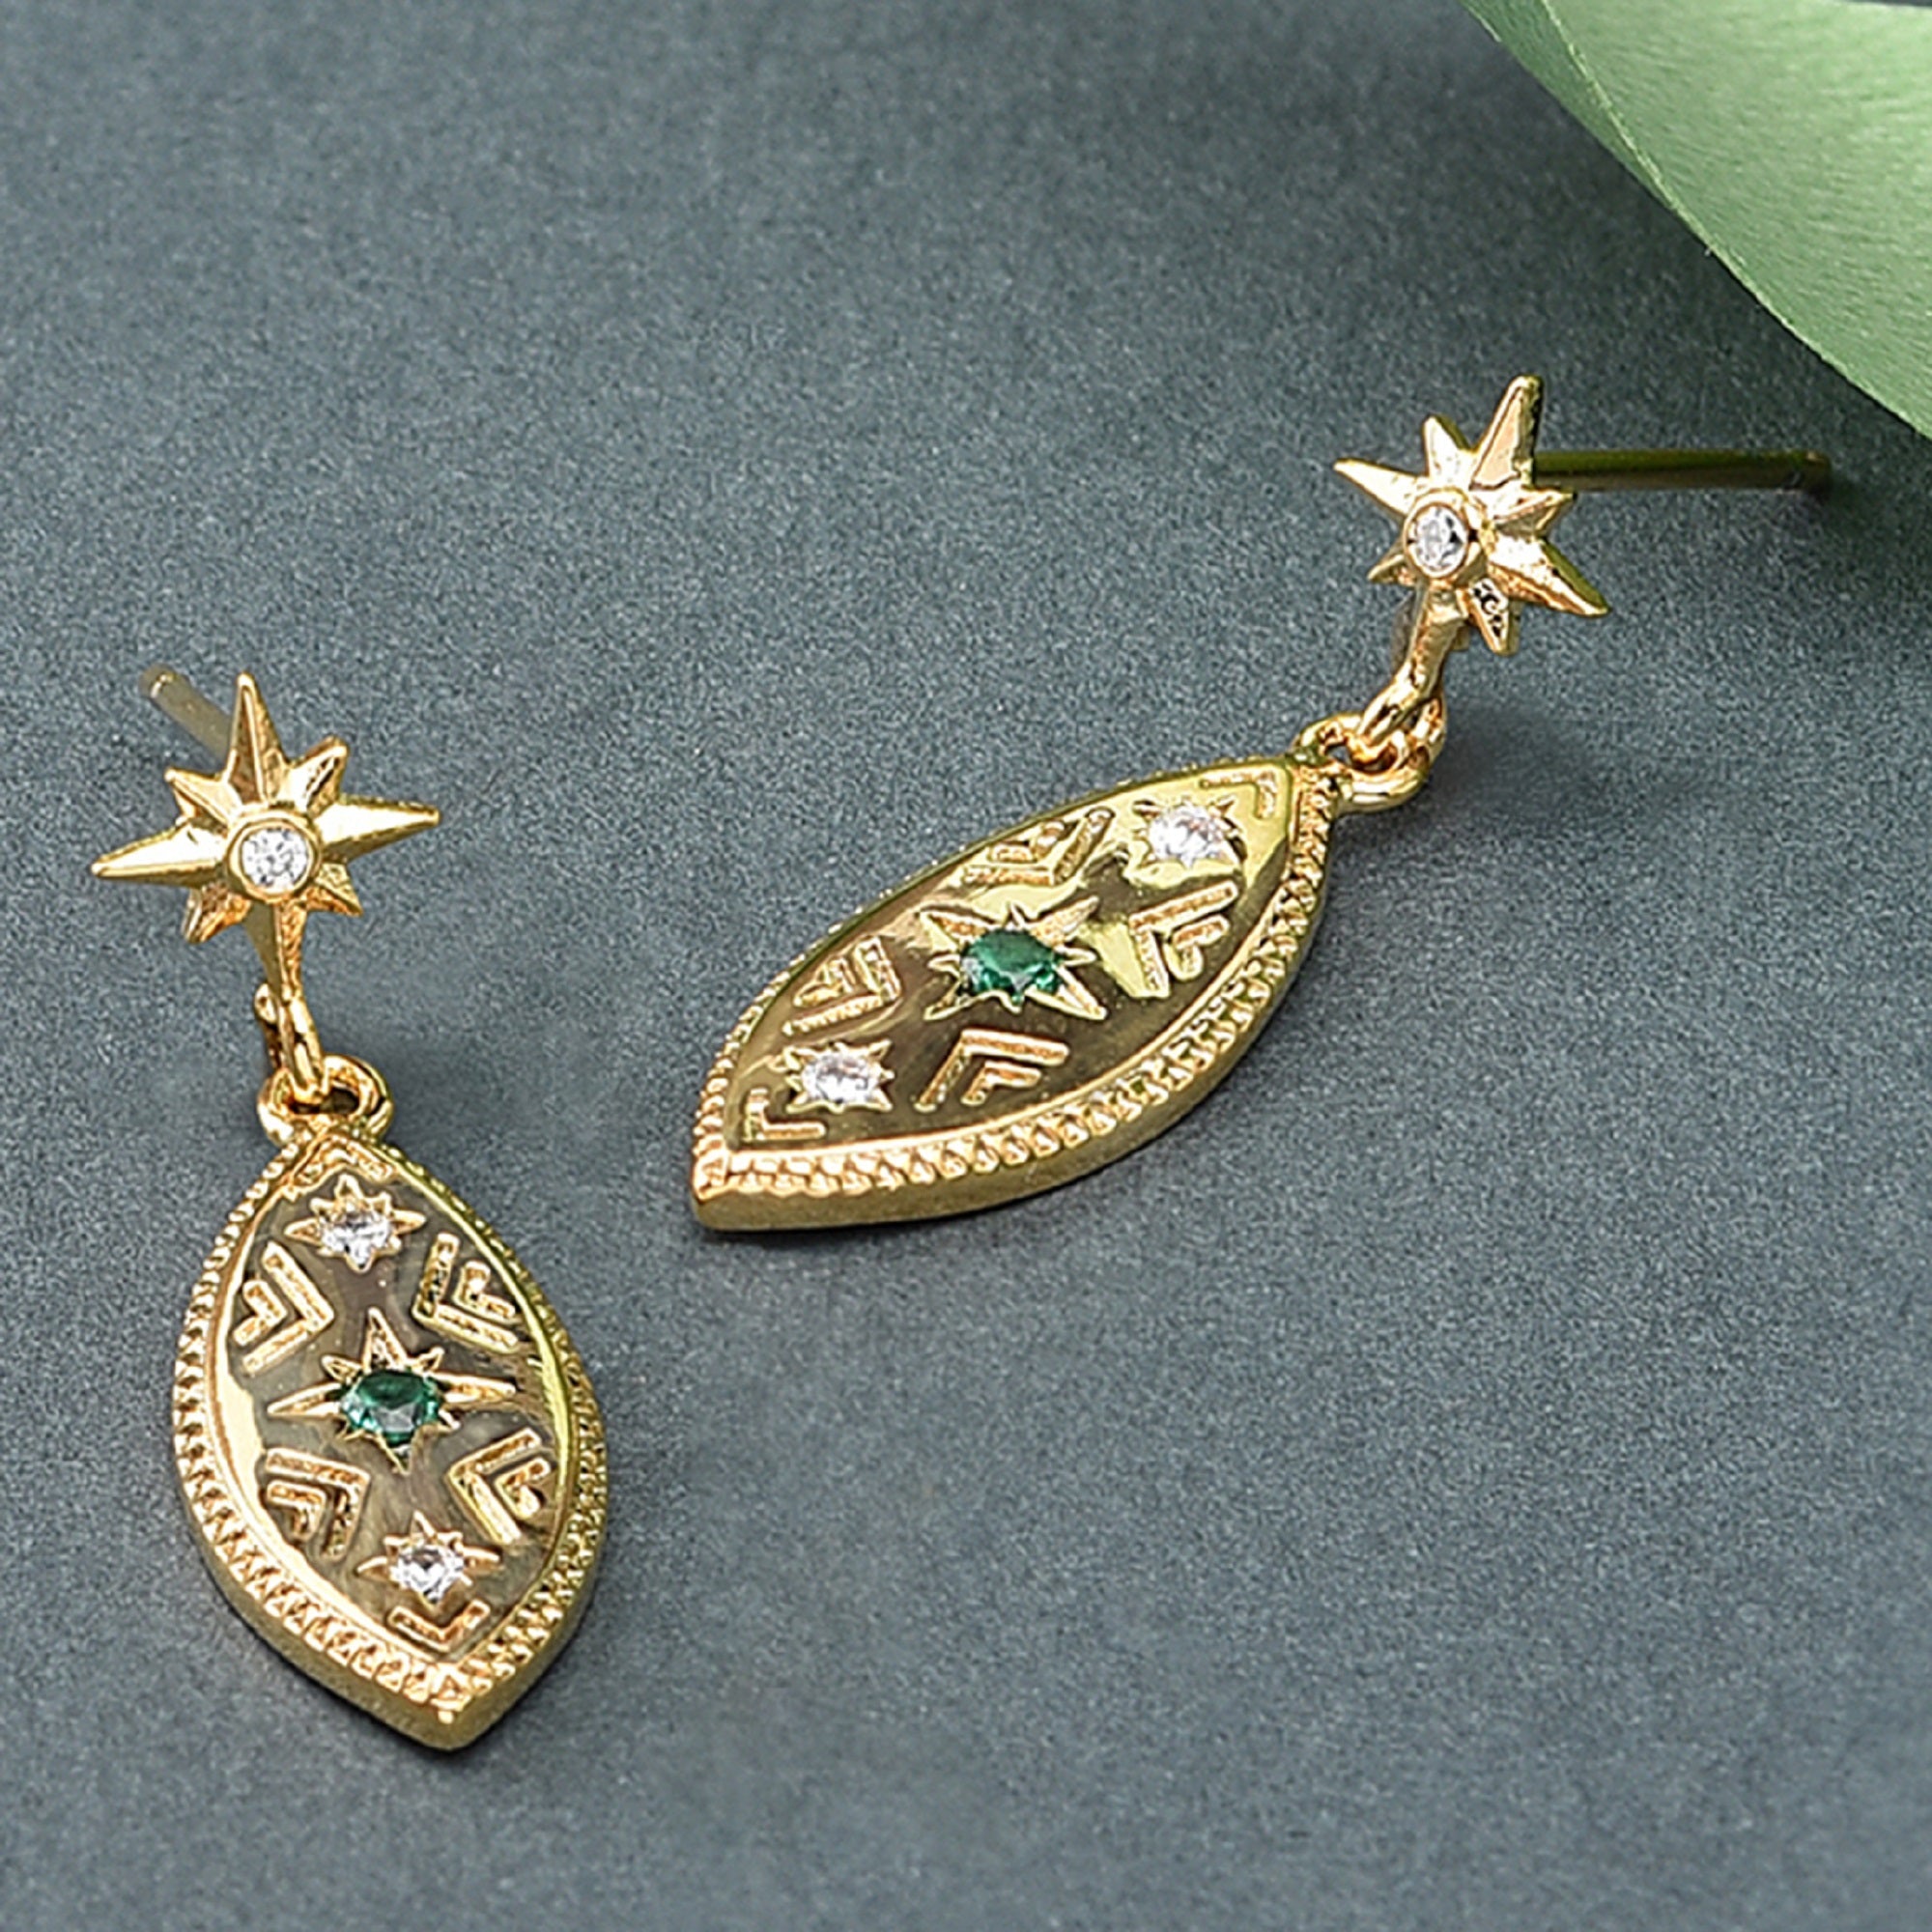 Real Gold Plated Limited Vintage Drop Earrings For Women By Accessorize London